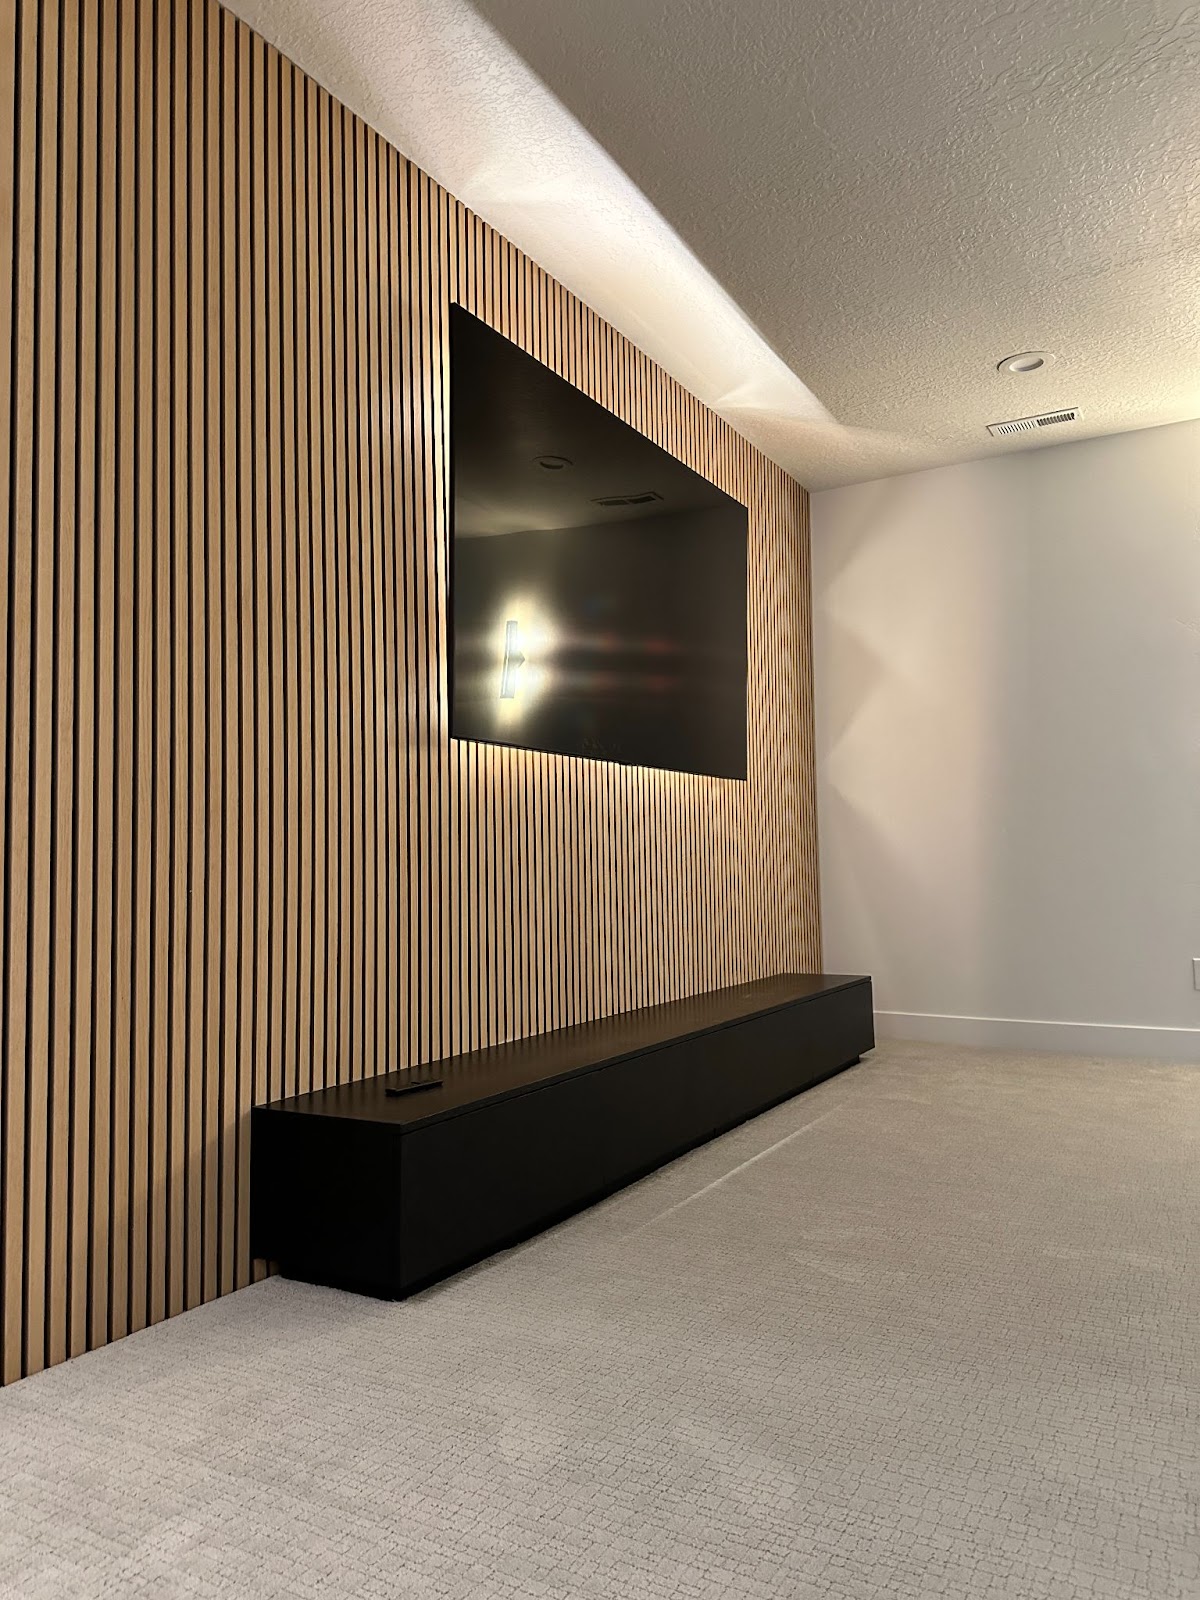 An exquisite basement theater featuring a spacious living room with a sleek wall-mounted TV